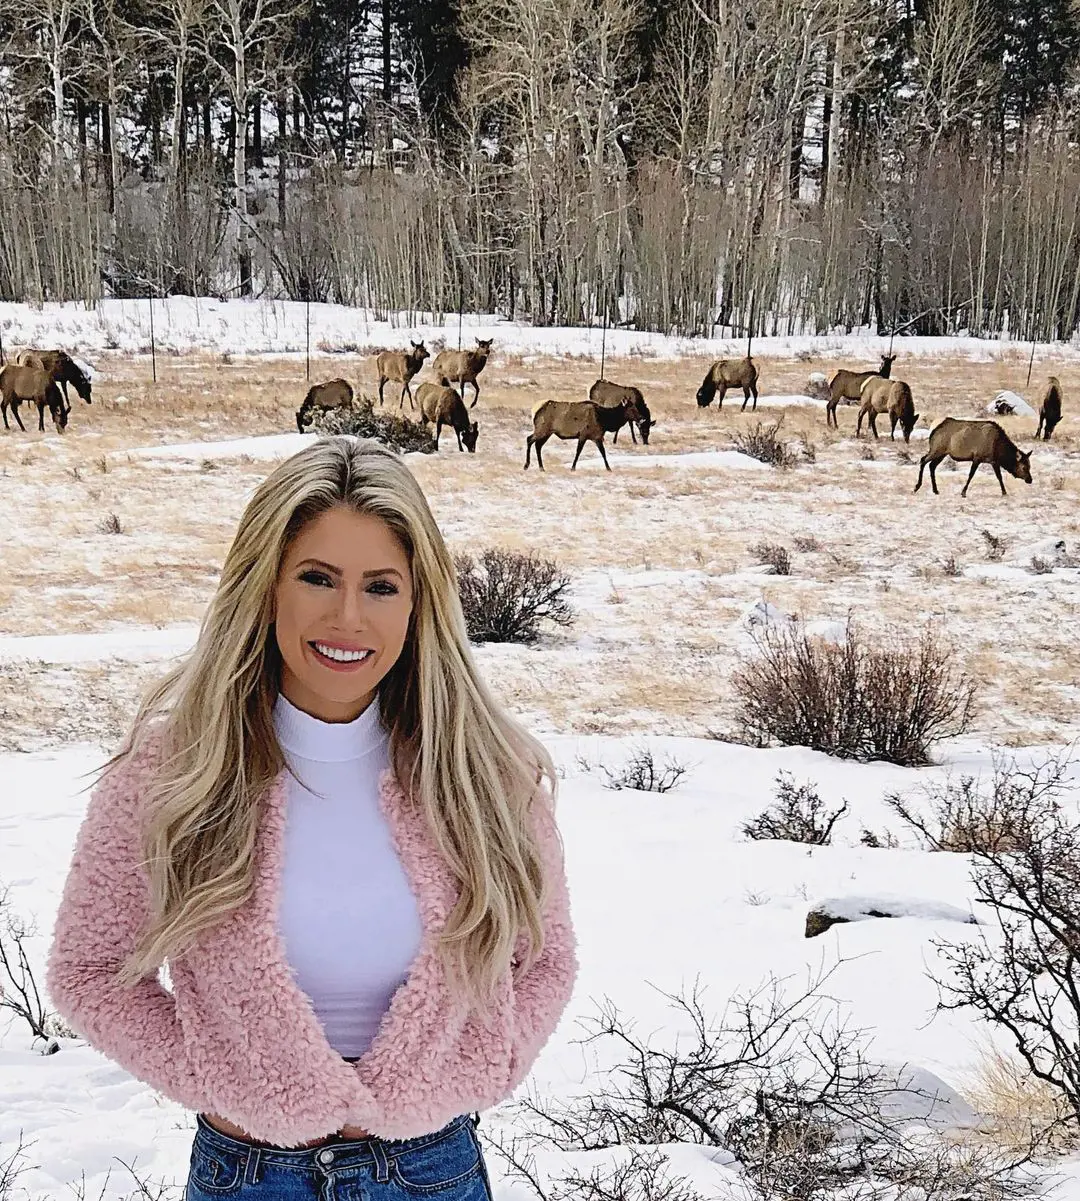 The reality star spending her time with her father in Colorado's Christmas